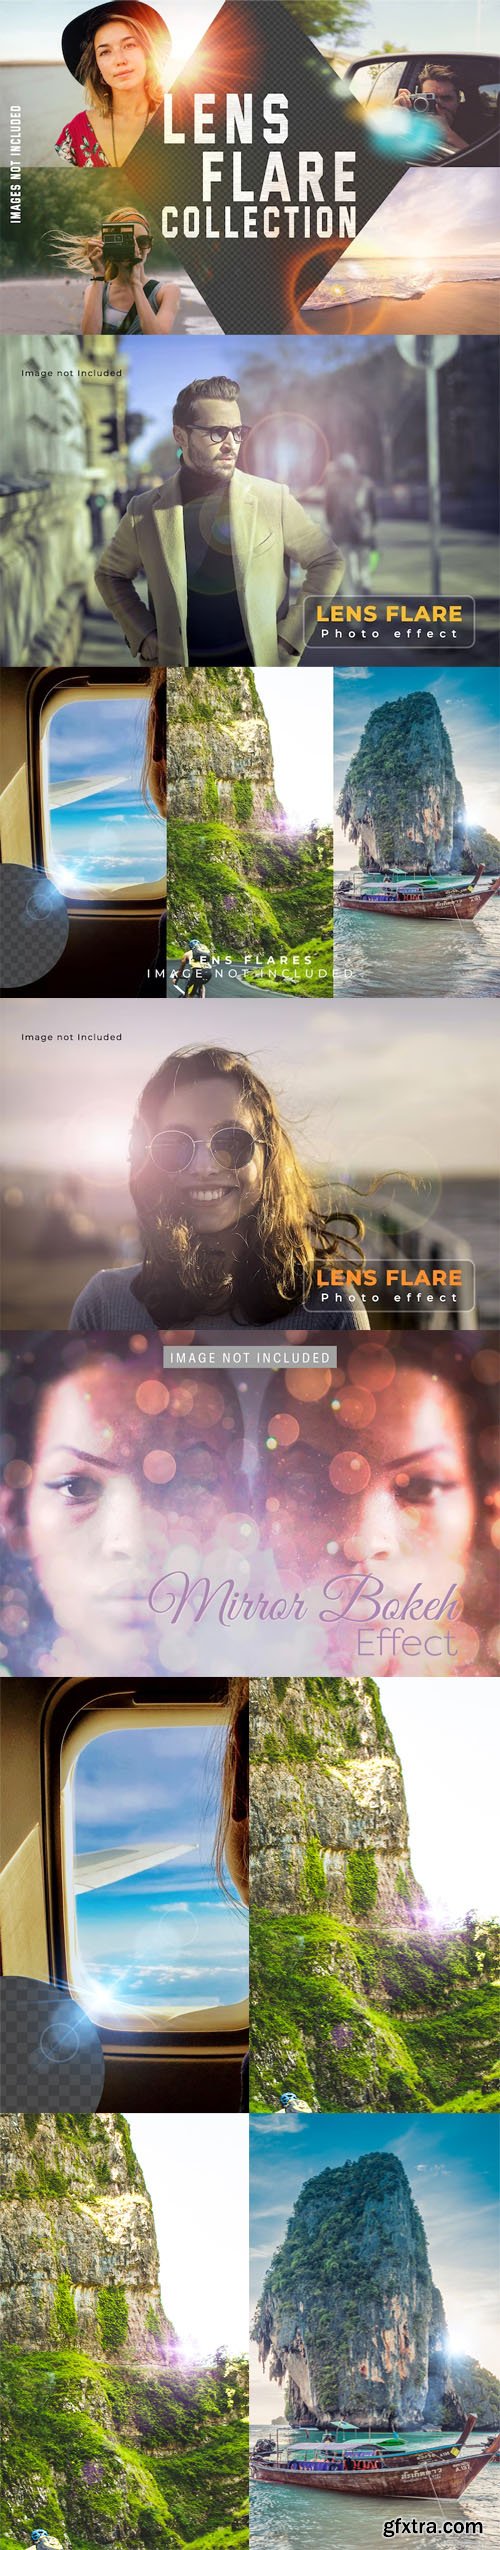 Lens Flare Photo Effects - Premium Collection for Photoshop